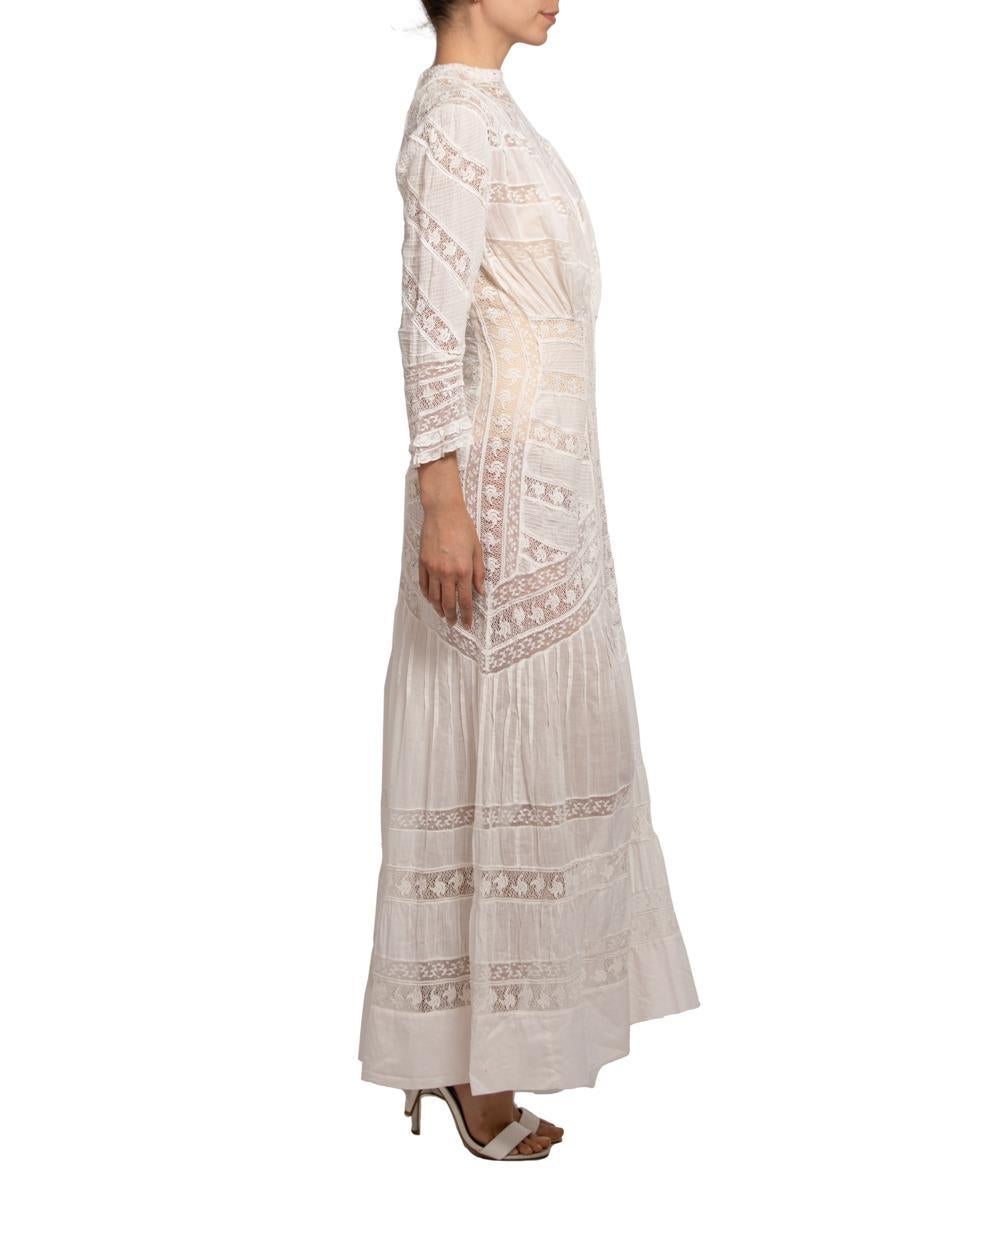 Women's Victorian Cream Organic Cotton Lace Tea Dress With Sleeves For Sale